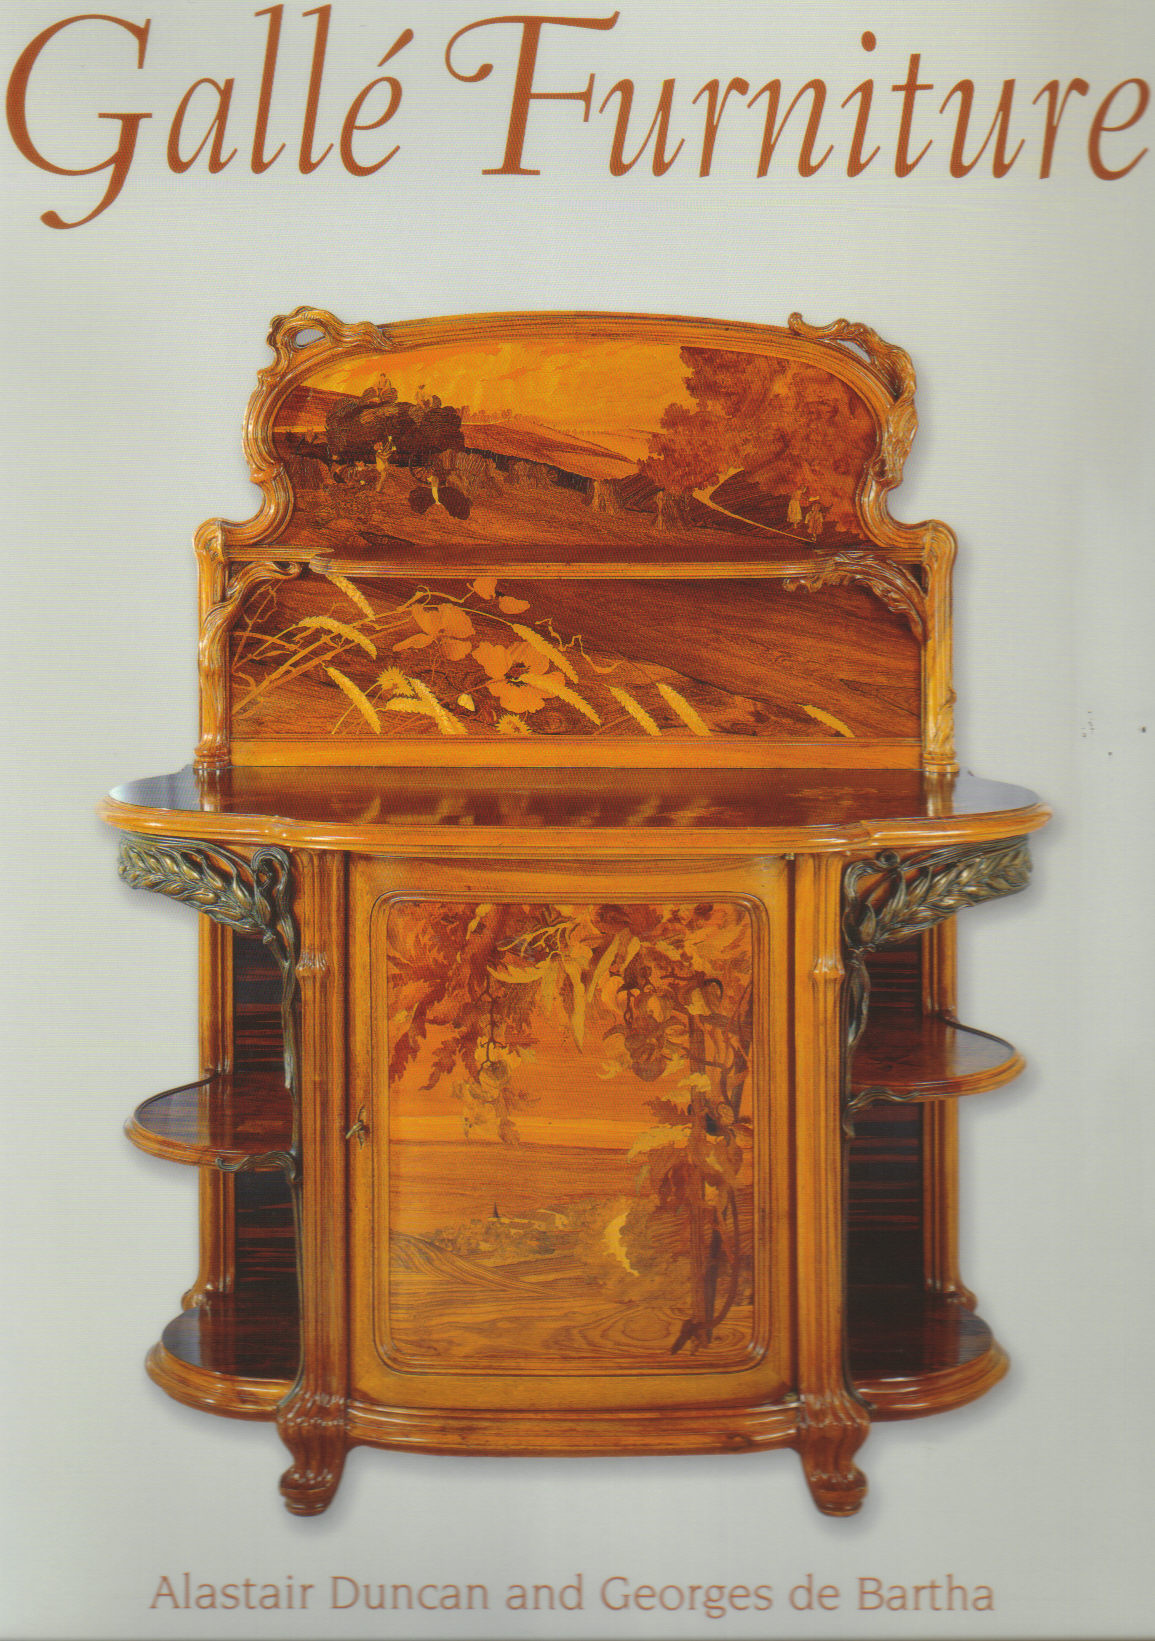 Galle Commode